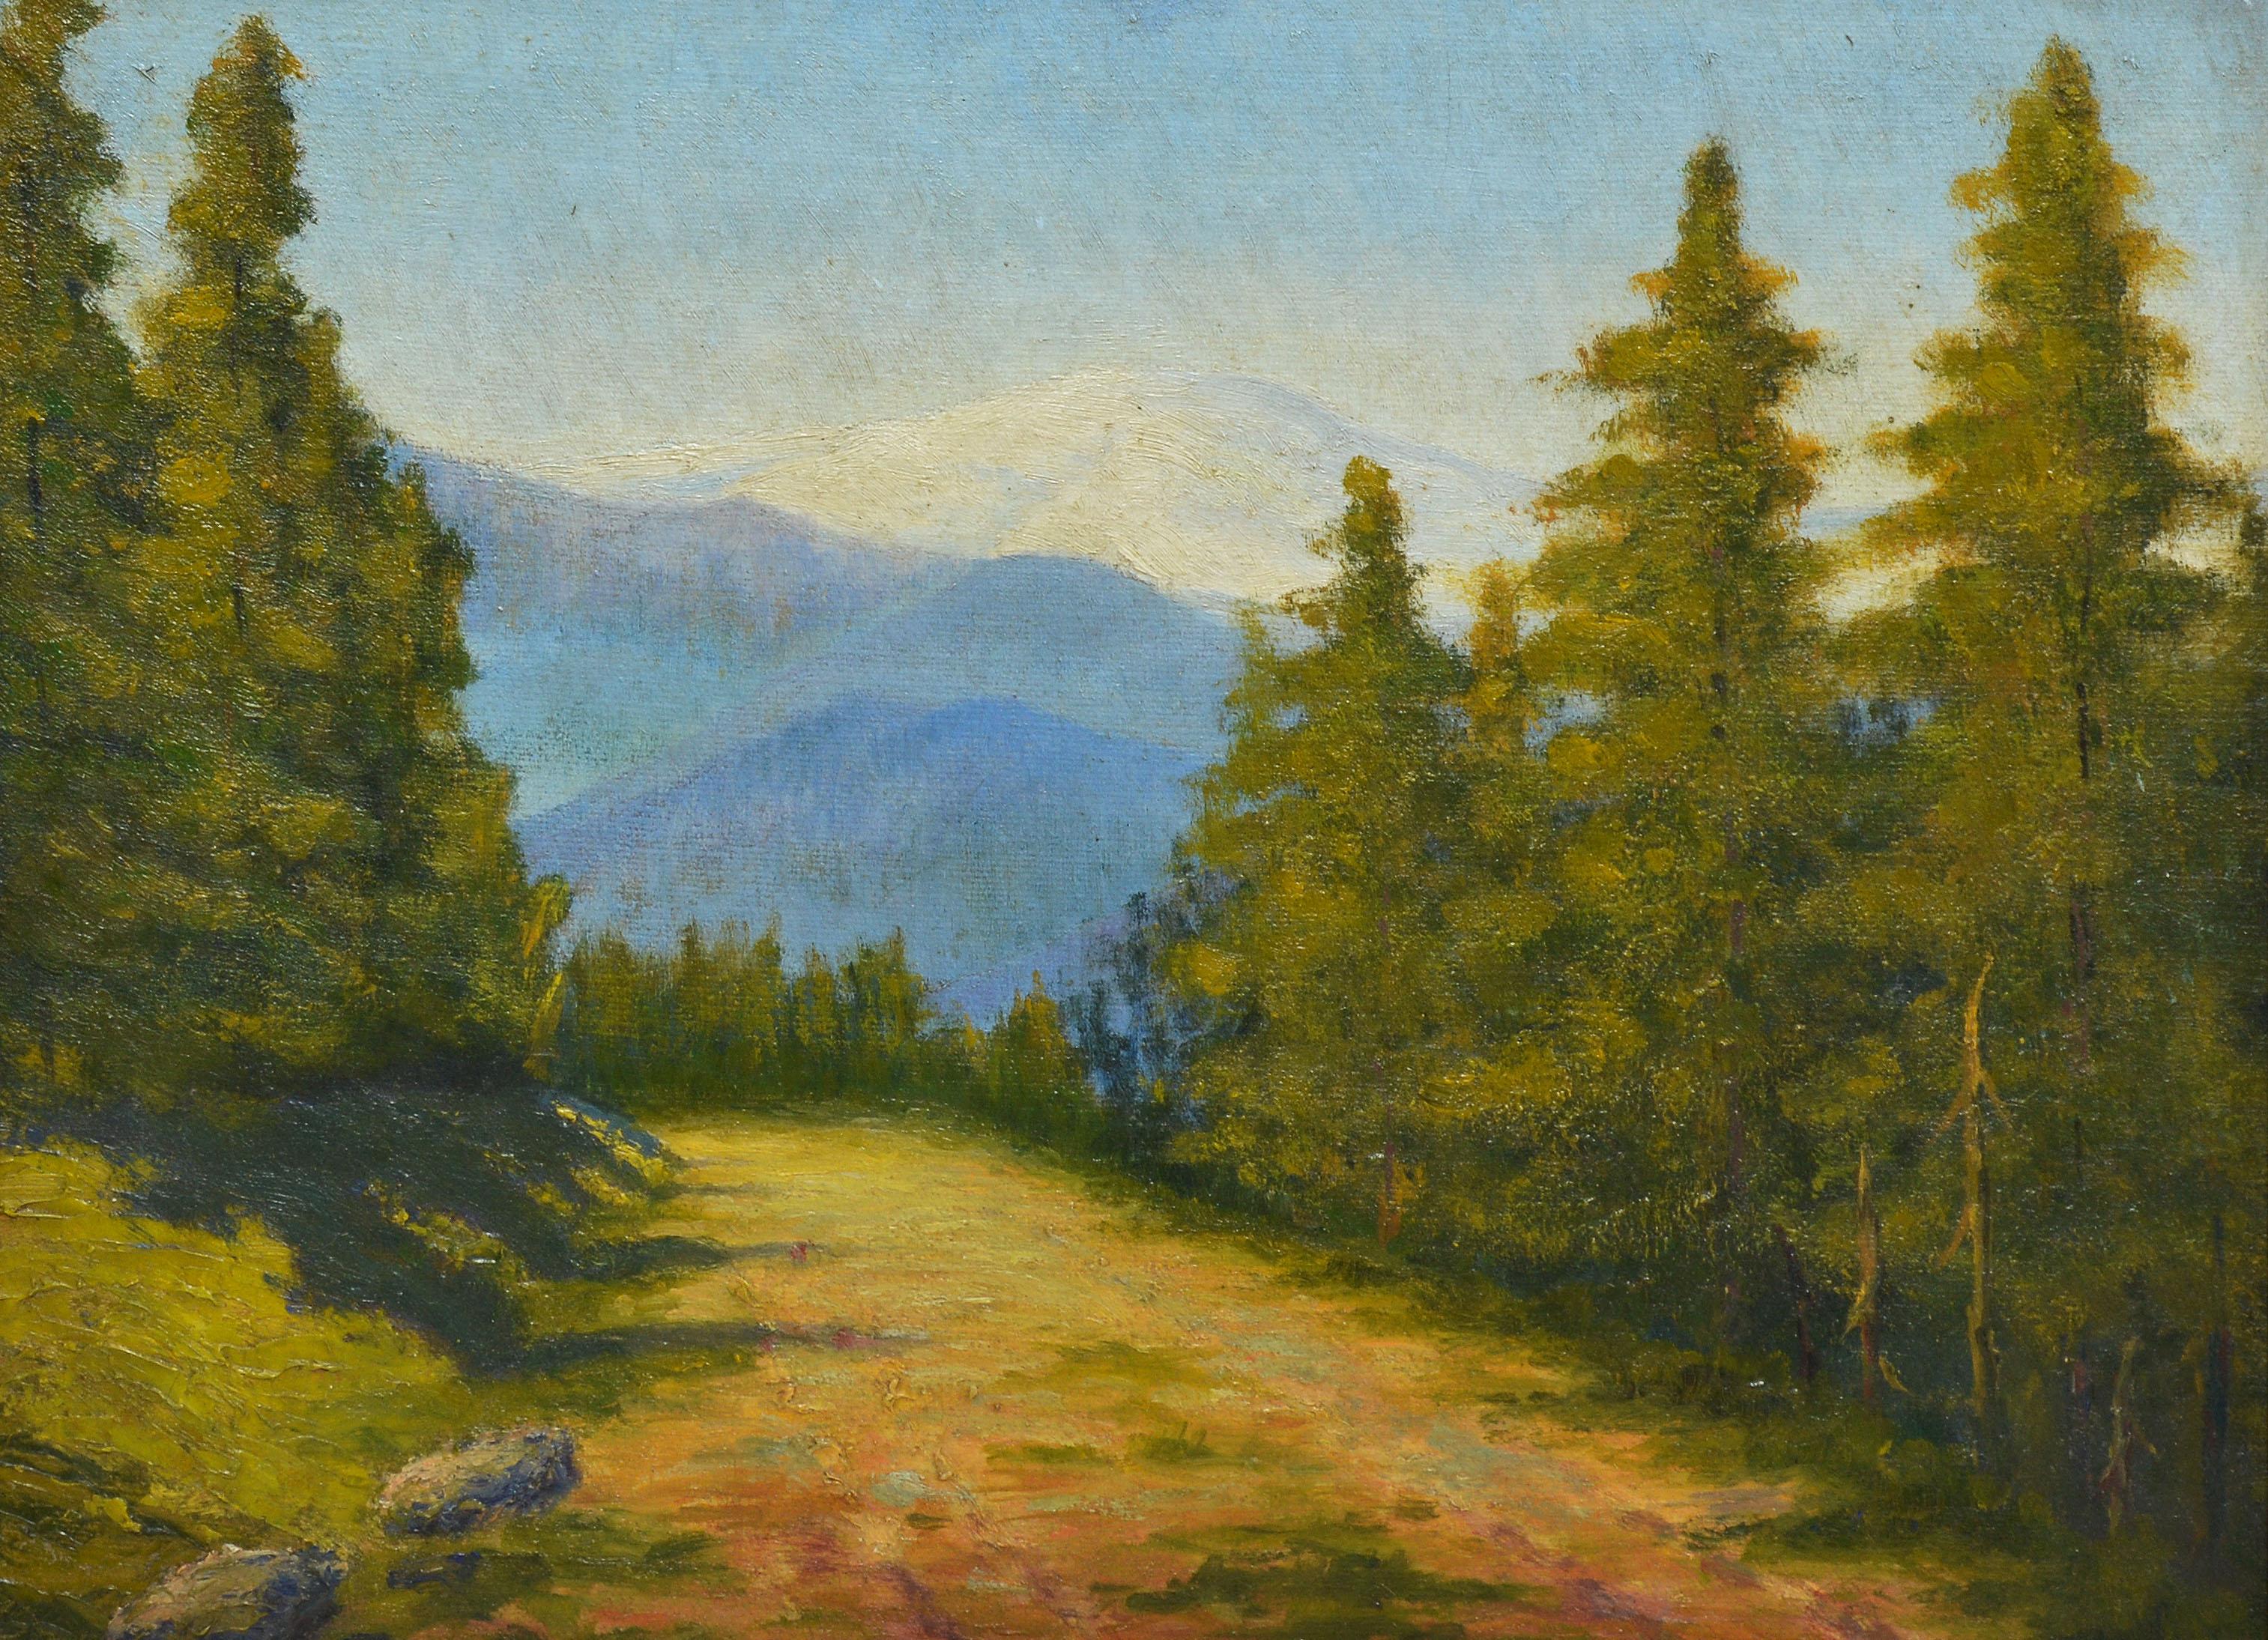 Impressionist view of a California landscape.  Oil on canvas, circa 1900.  Unsigned.  Displayed in a giltwood frame.  Image size, 14